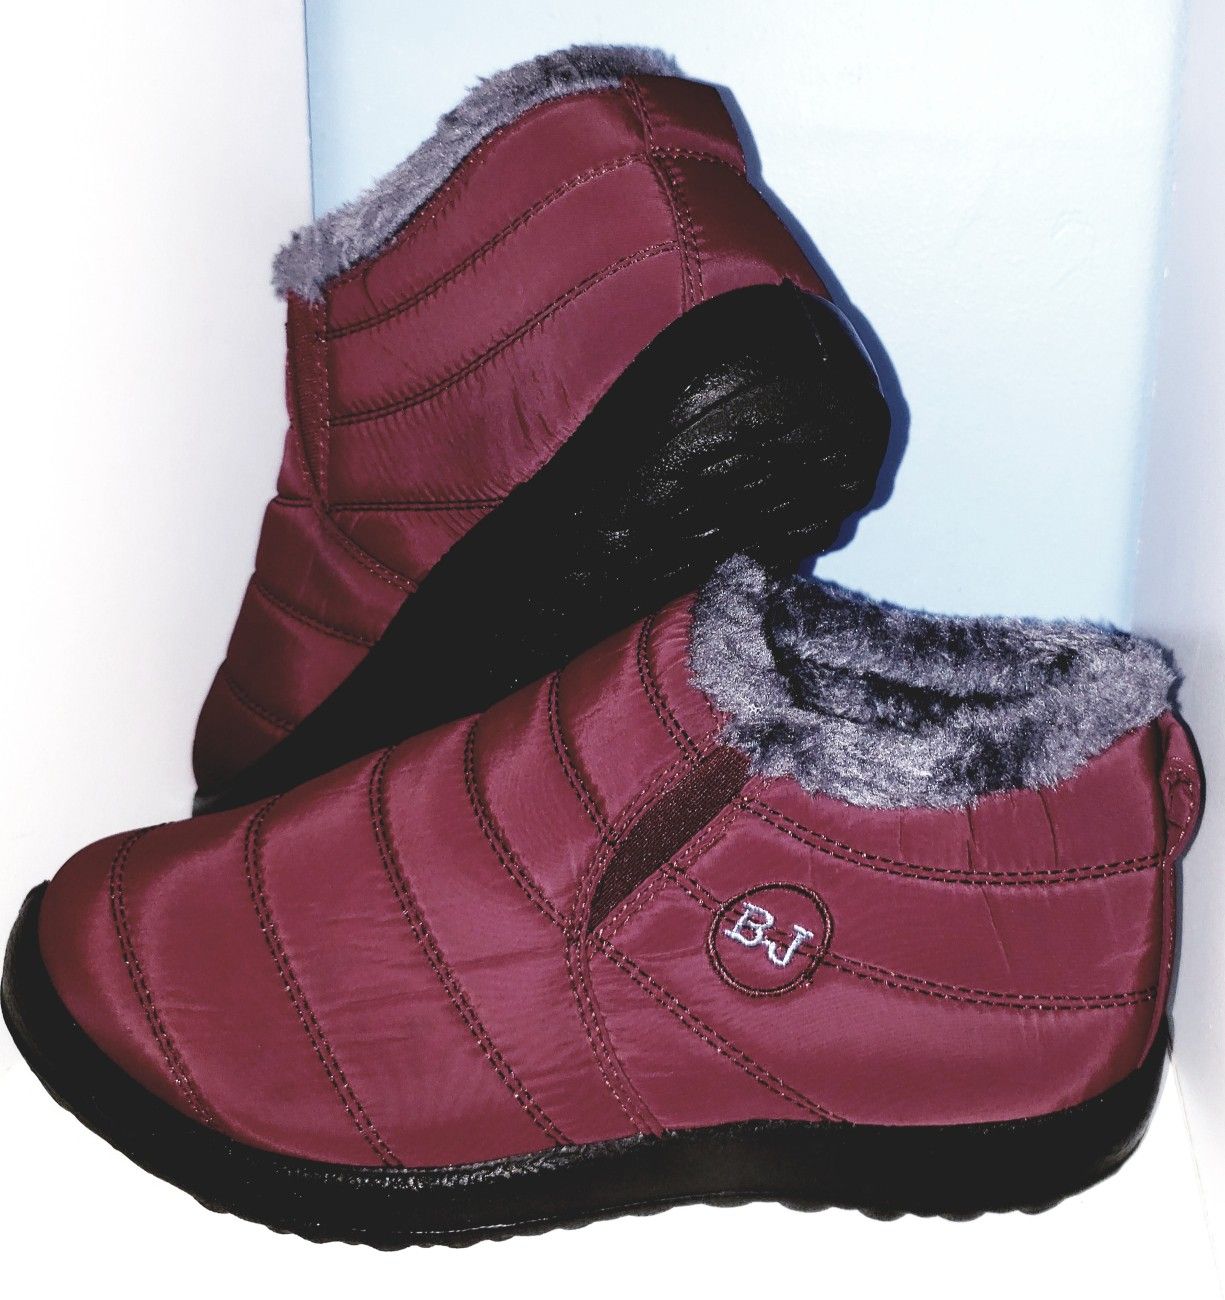 Unisex Winter Snow Boots Warm Fur Lined Ankle Shoes Waterproof W(8-8.5) / M(6.5-7)